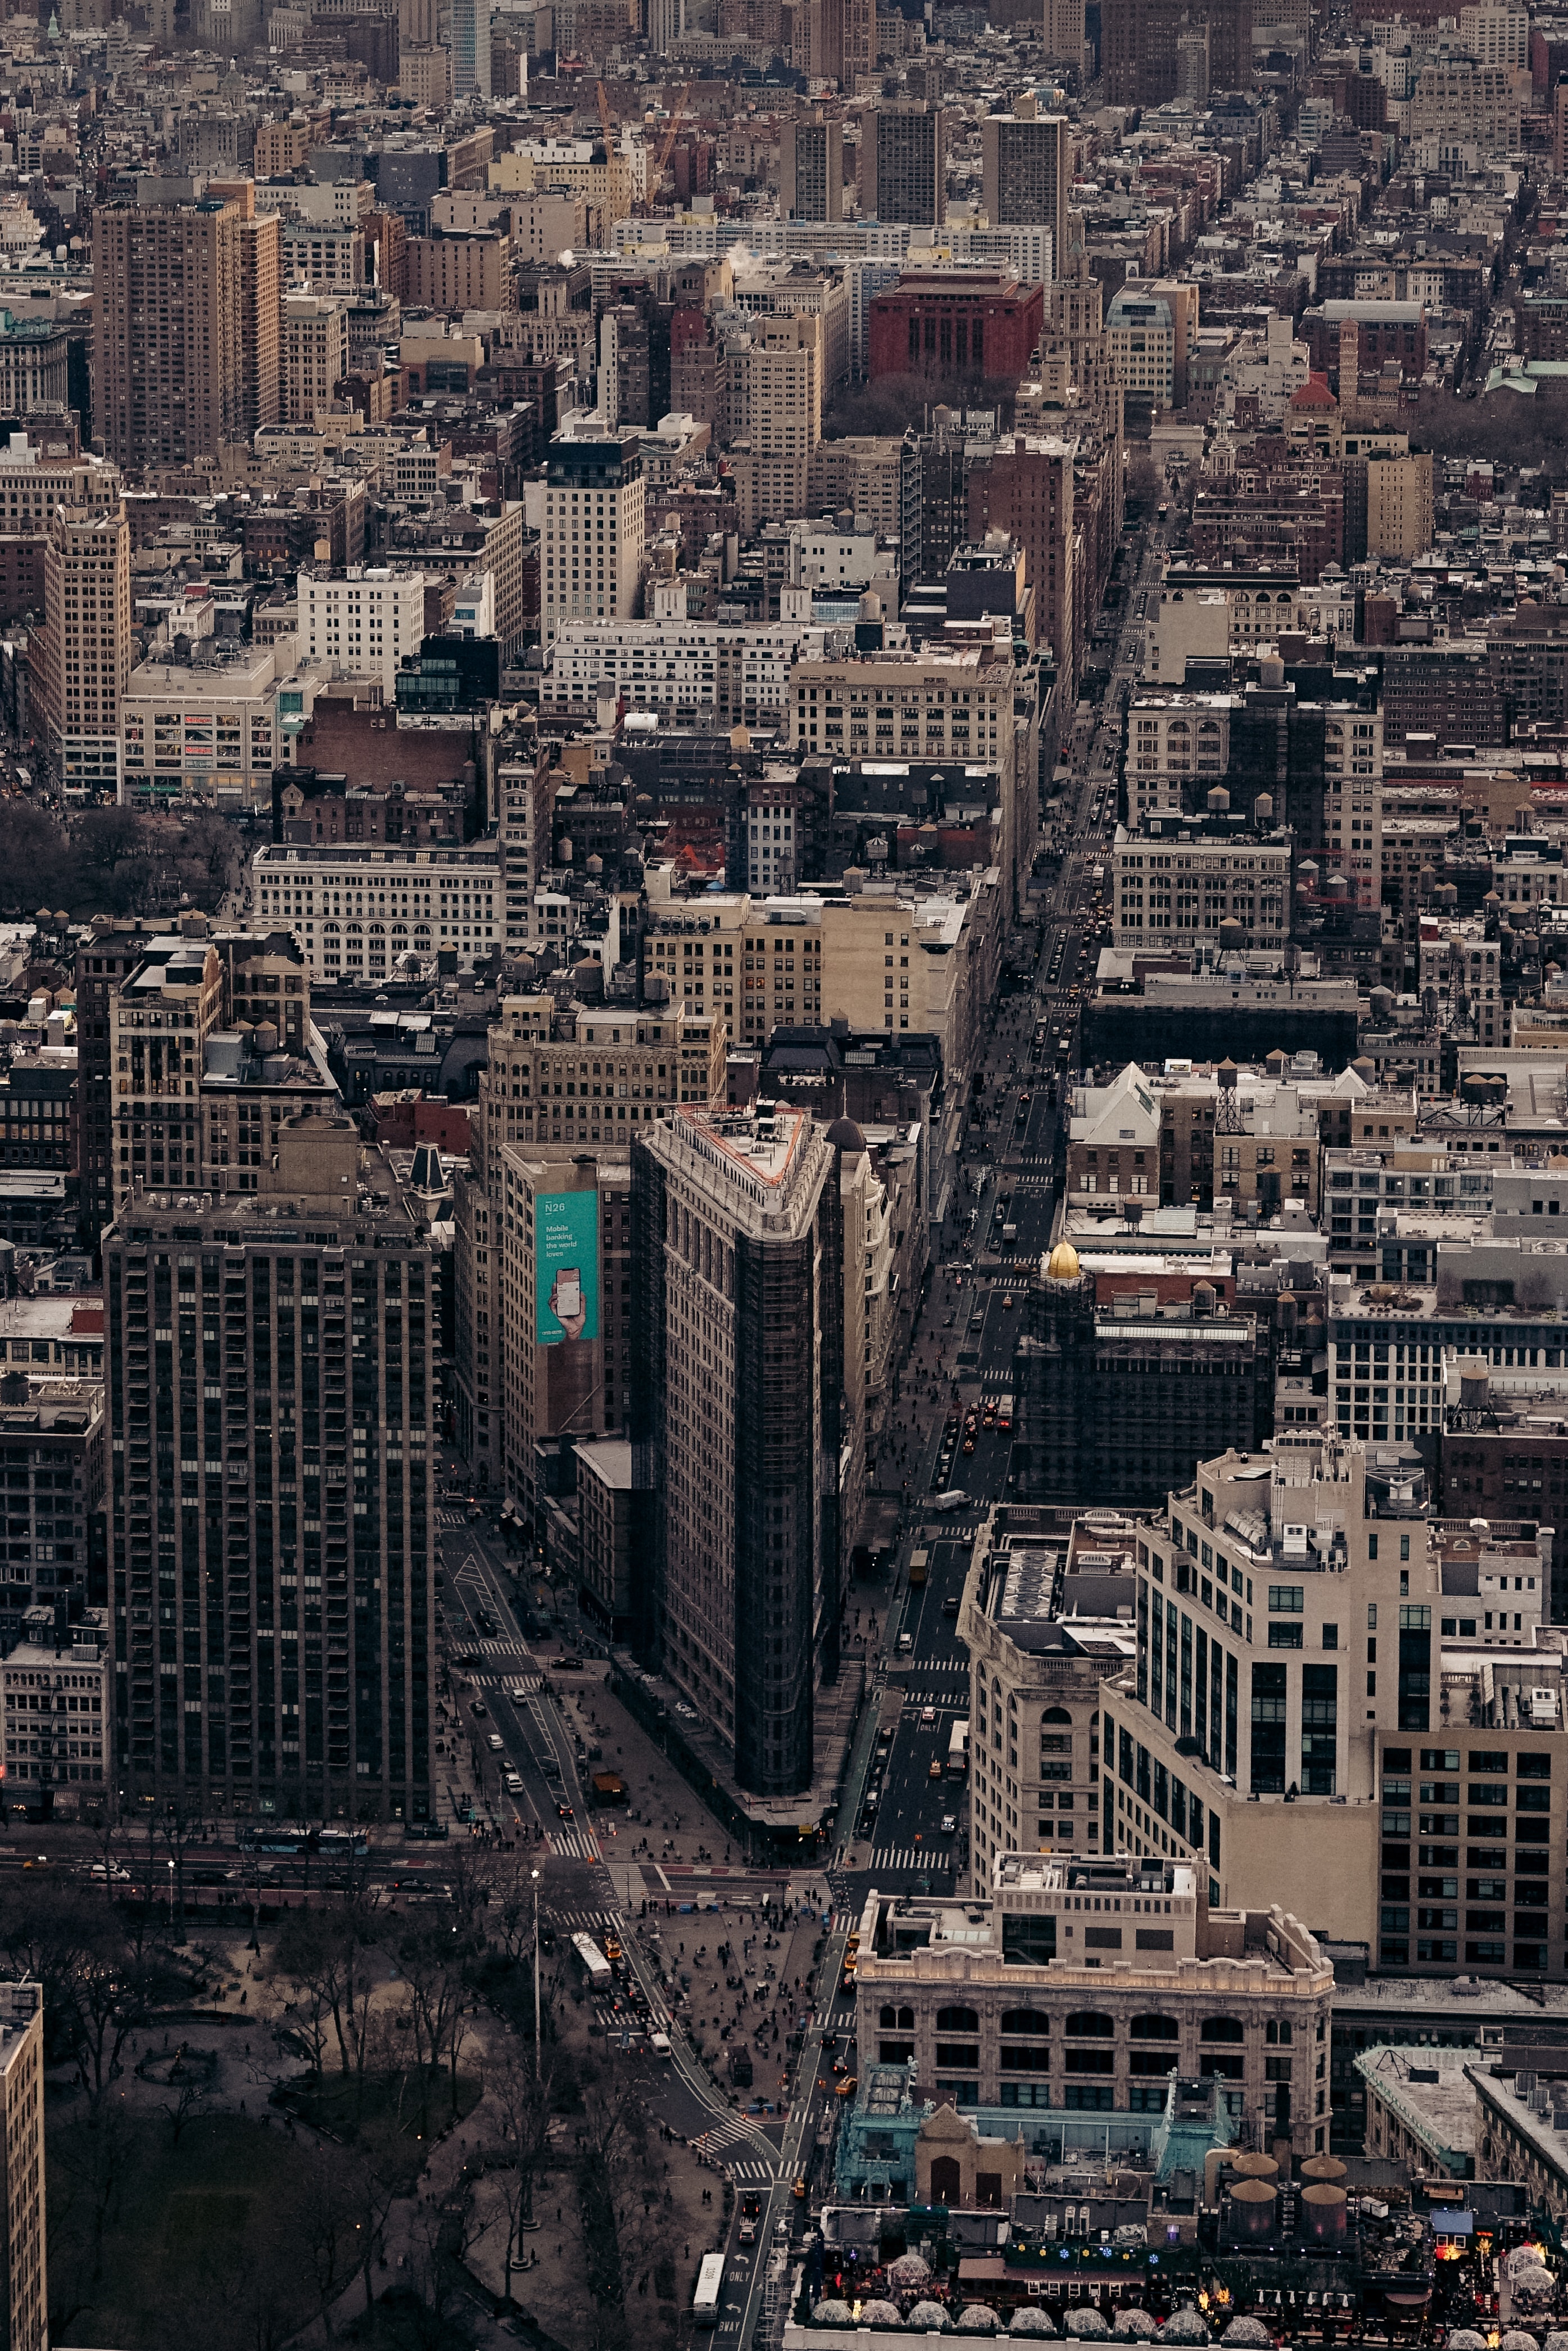 Download Phone wallpaper city, architecture, view from above, megapolis